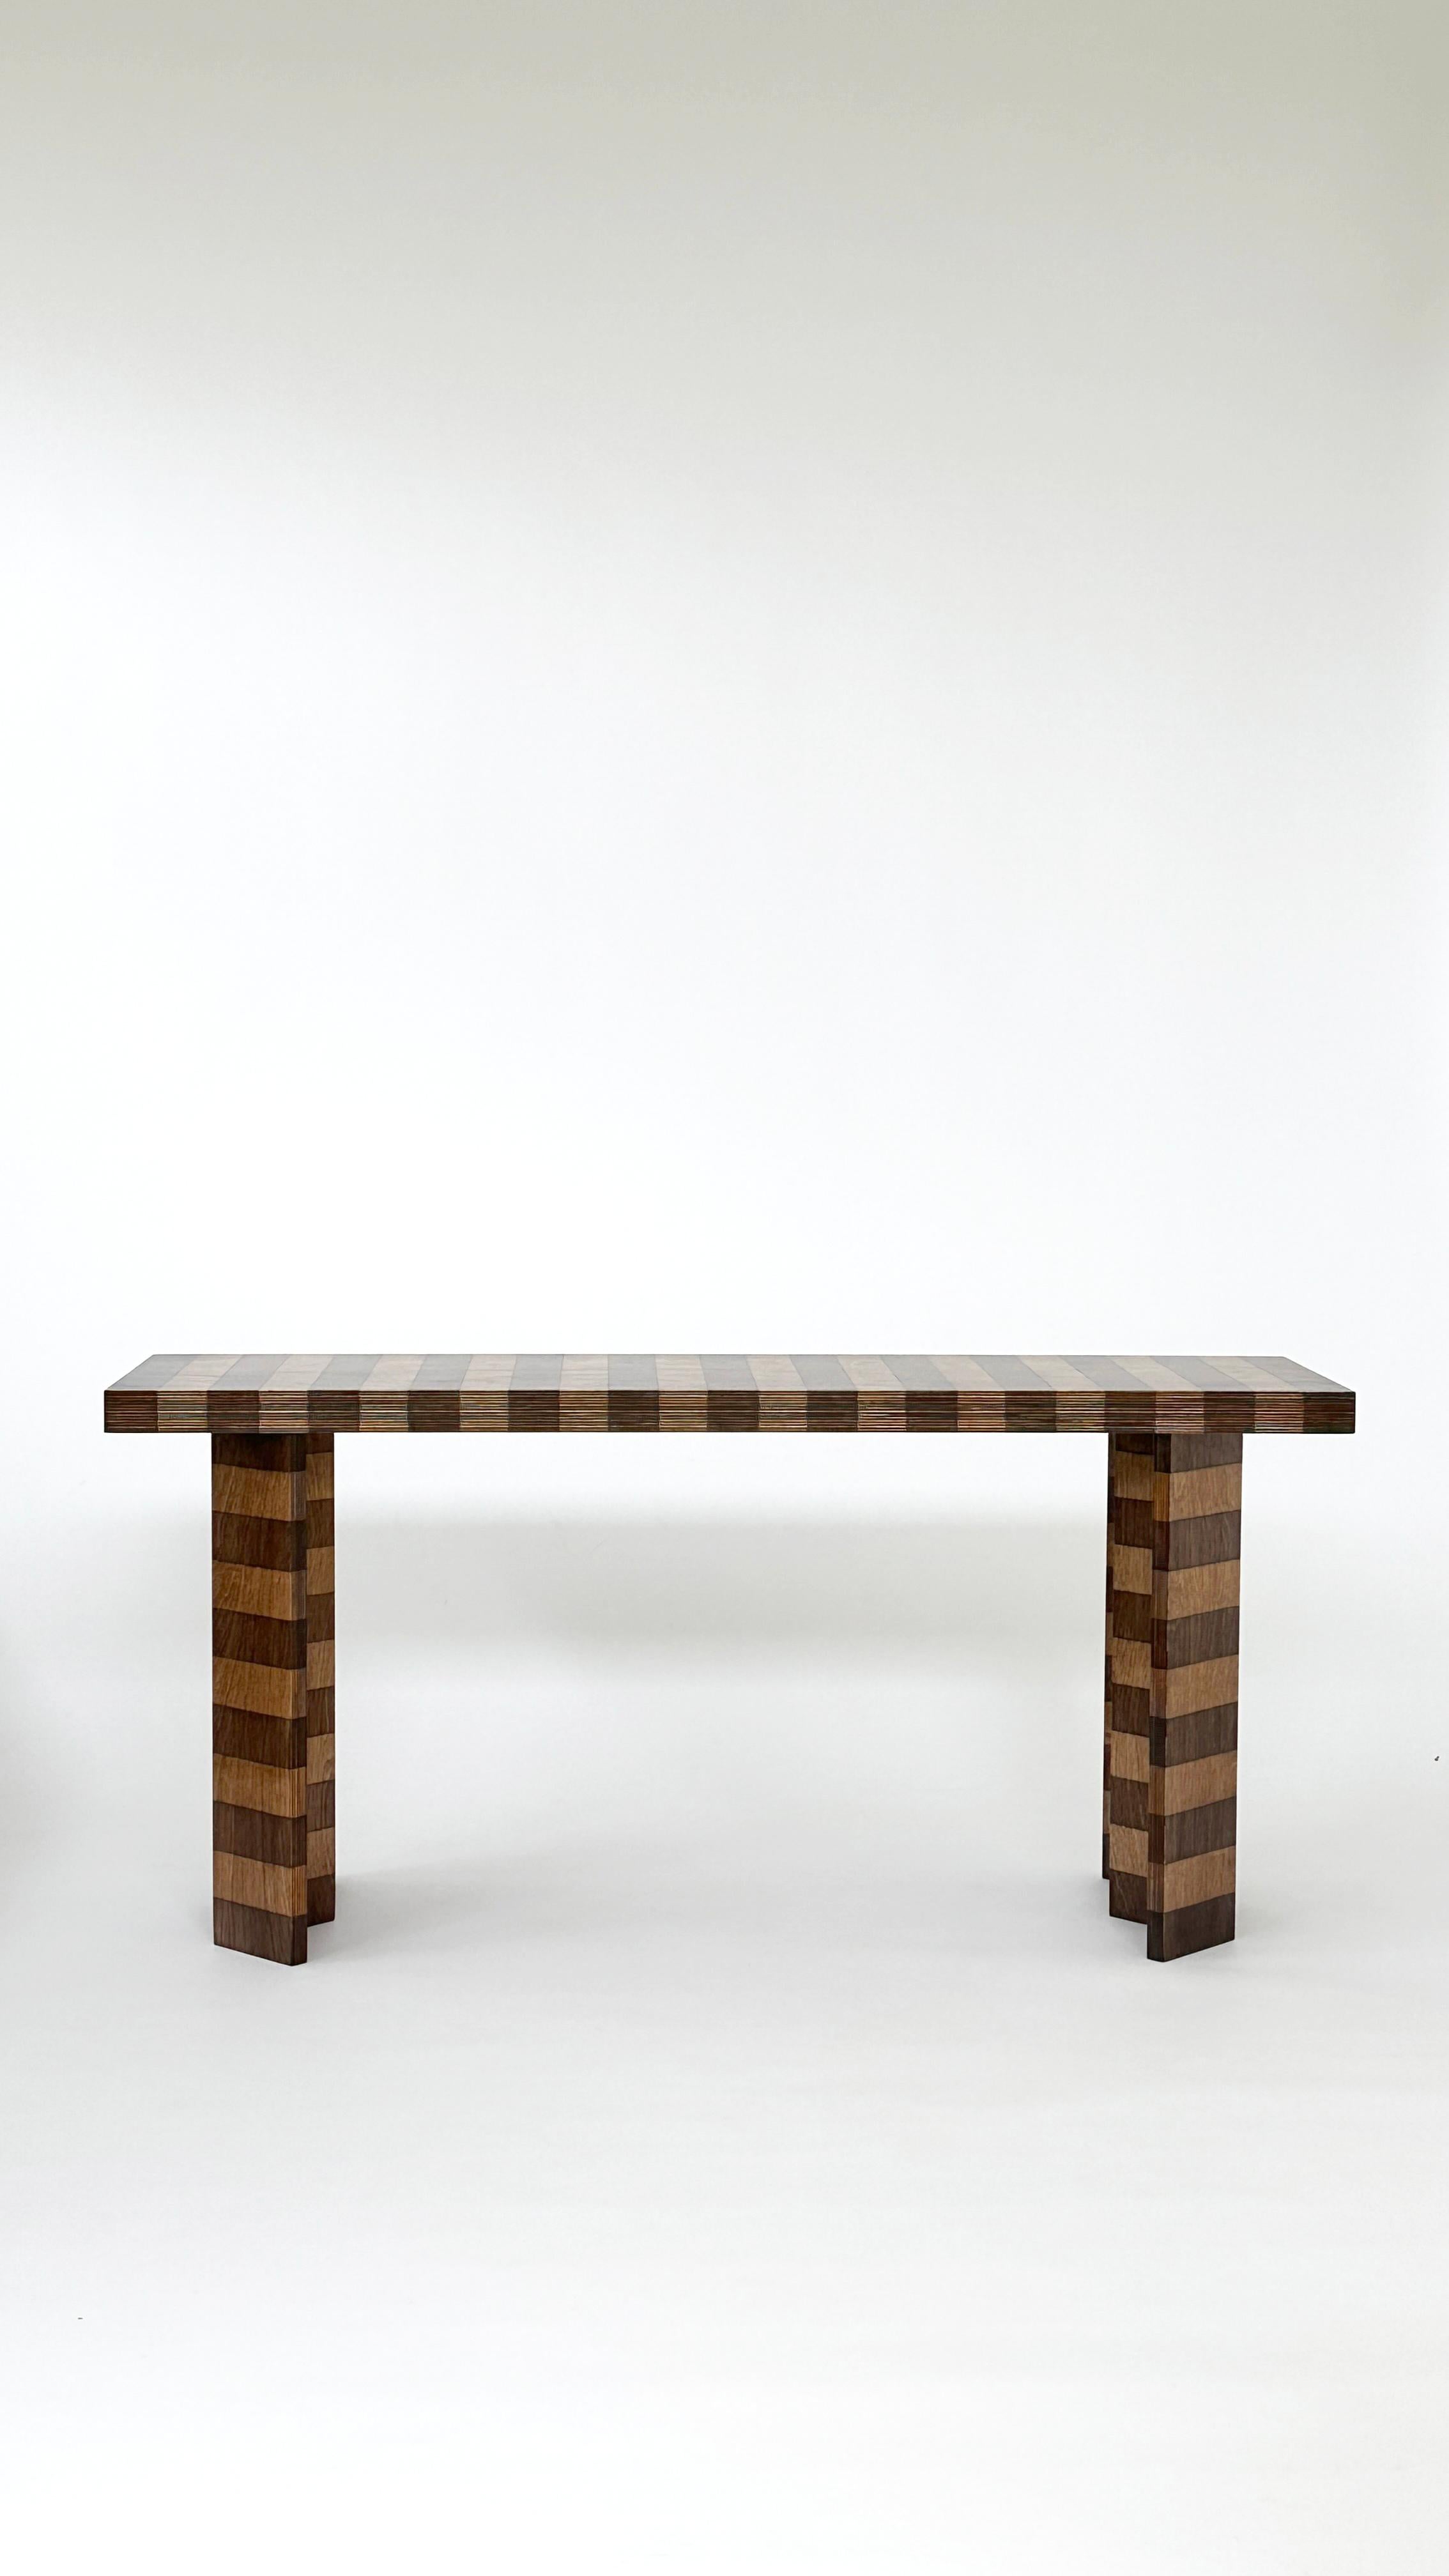 Post-Modern Striped Oak Bench by Goons For Sale